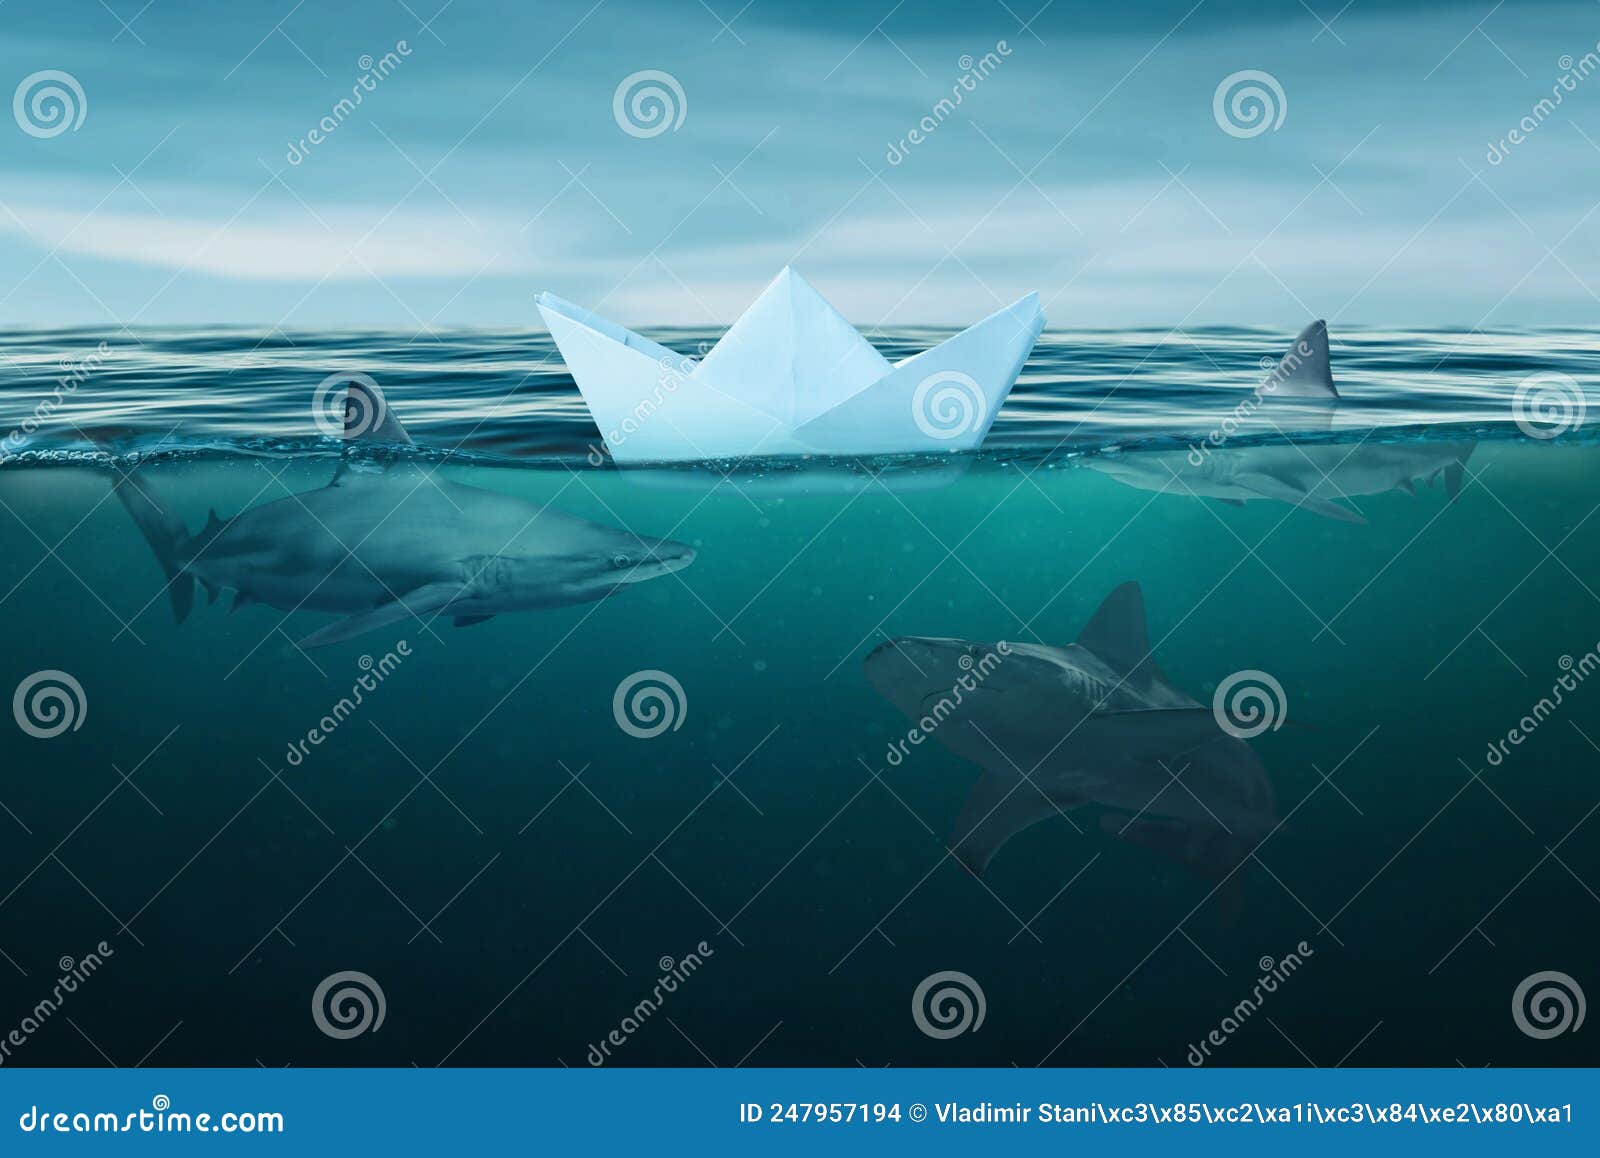 a paper boat surrounded by sharks on the high seas